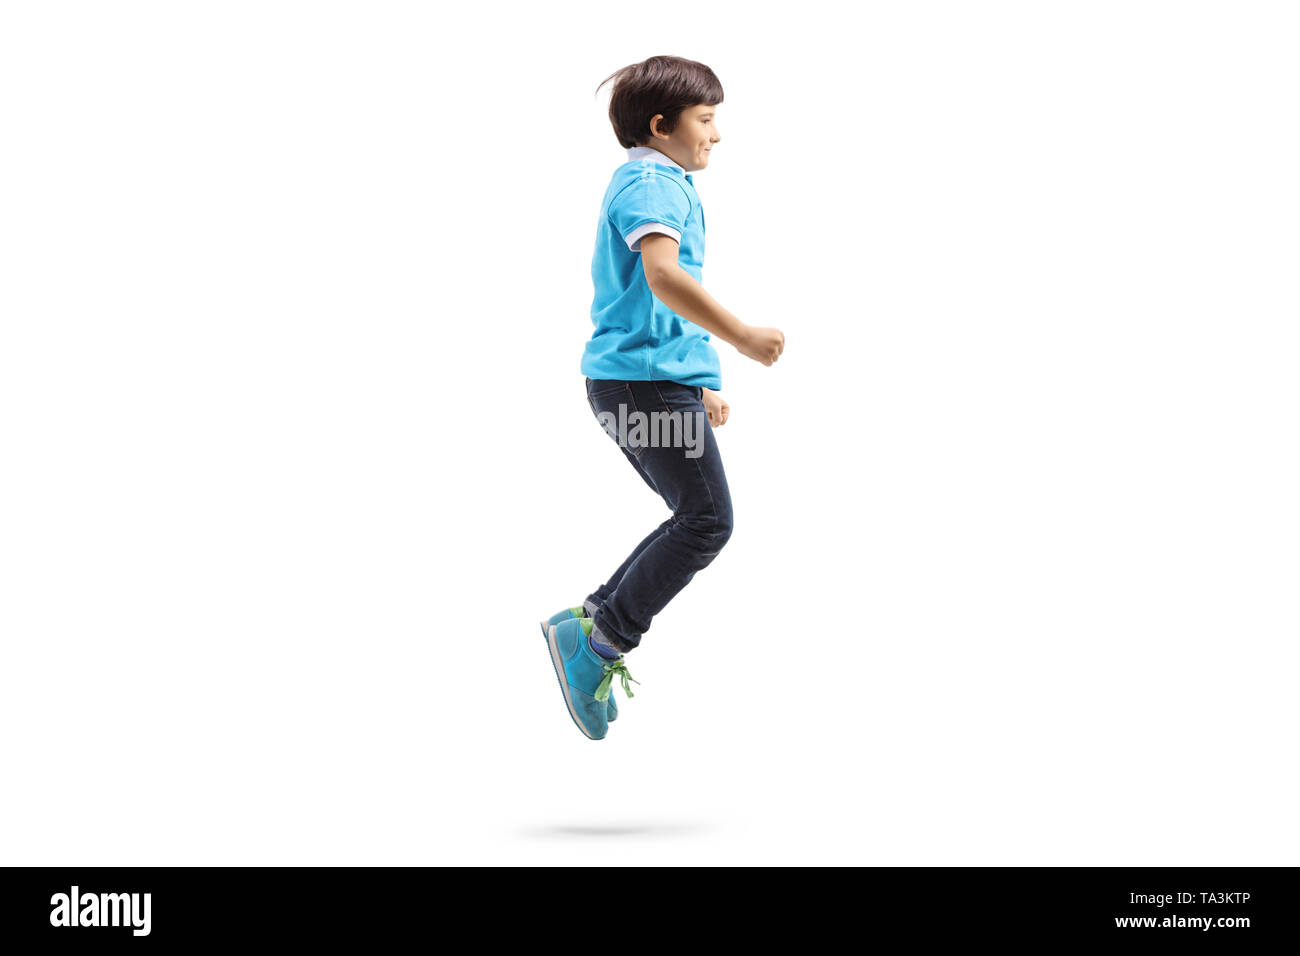 Full length profile shot of a happy boy jumping isolated on white background Stock Photo